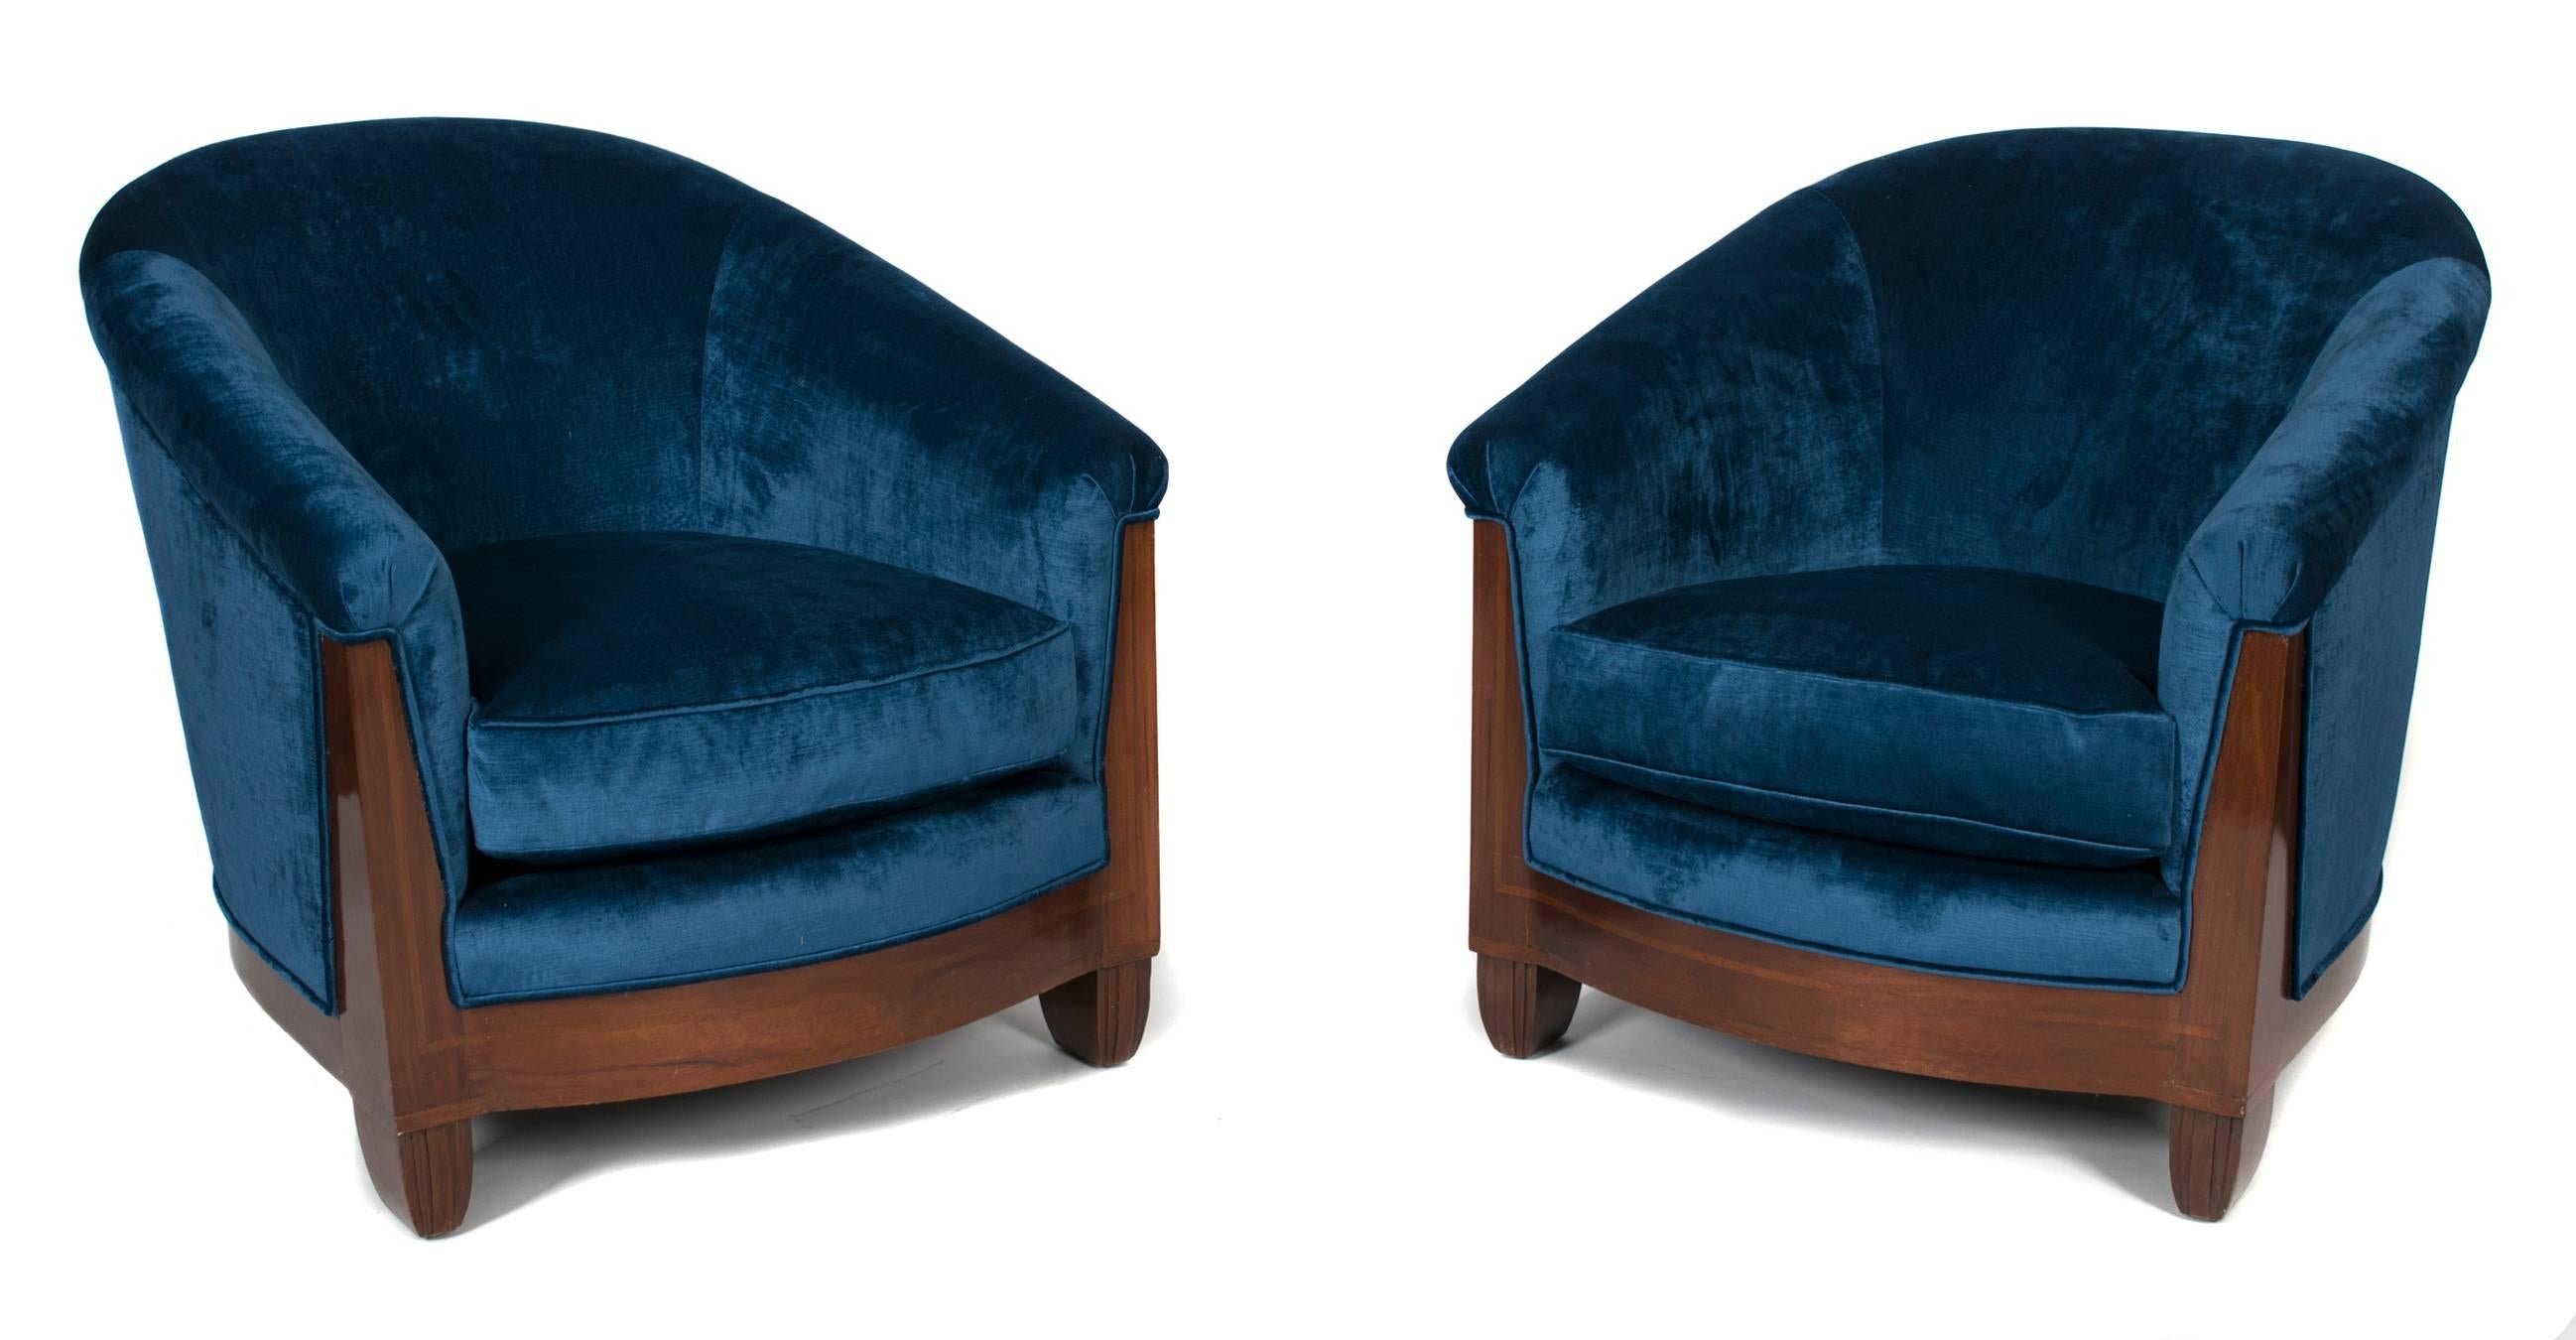 French Pair of Art Deco Period Mahogany Barrel Style Chairs, circa 1920s